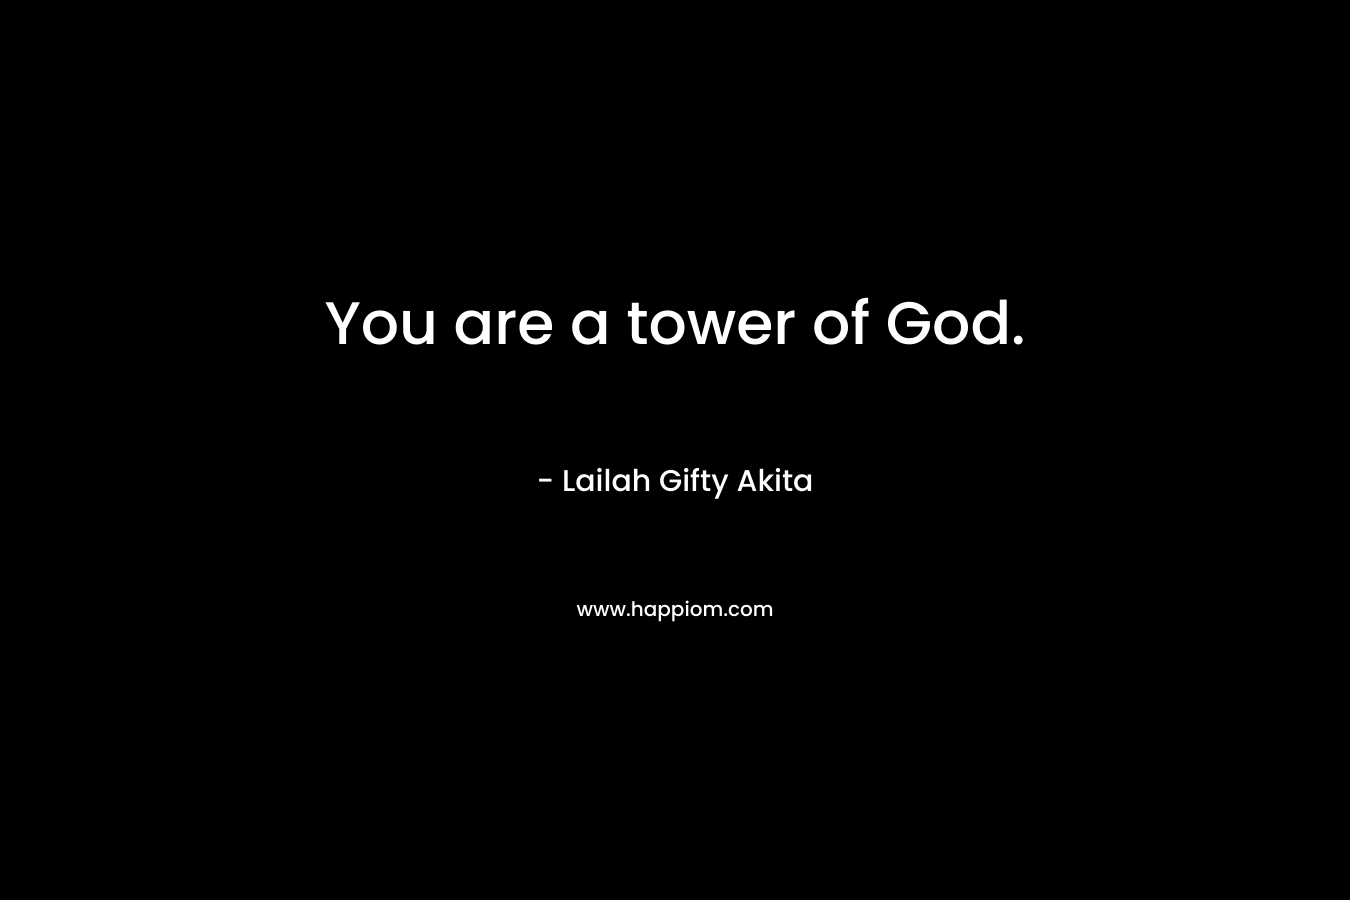 You are a tower of God.